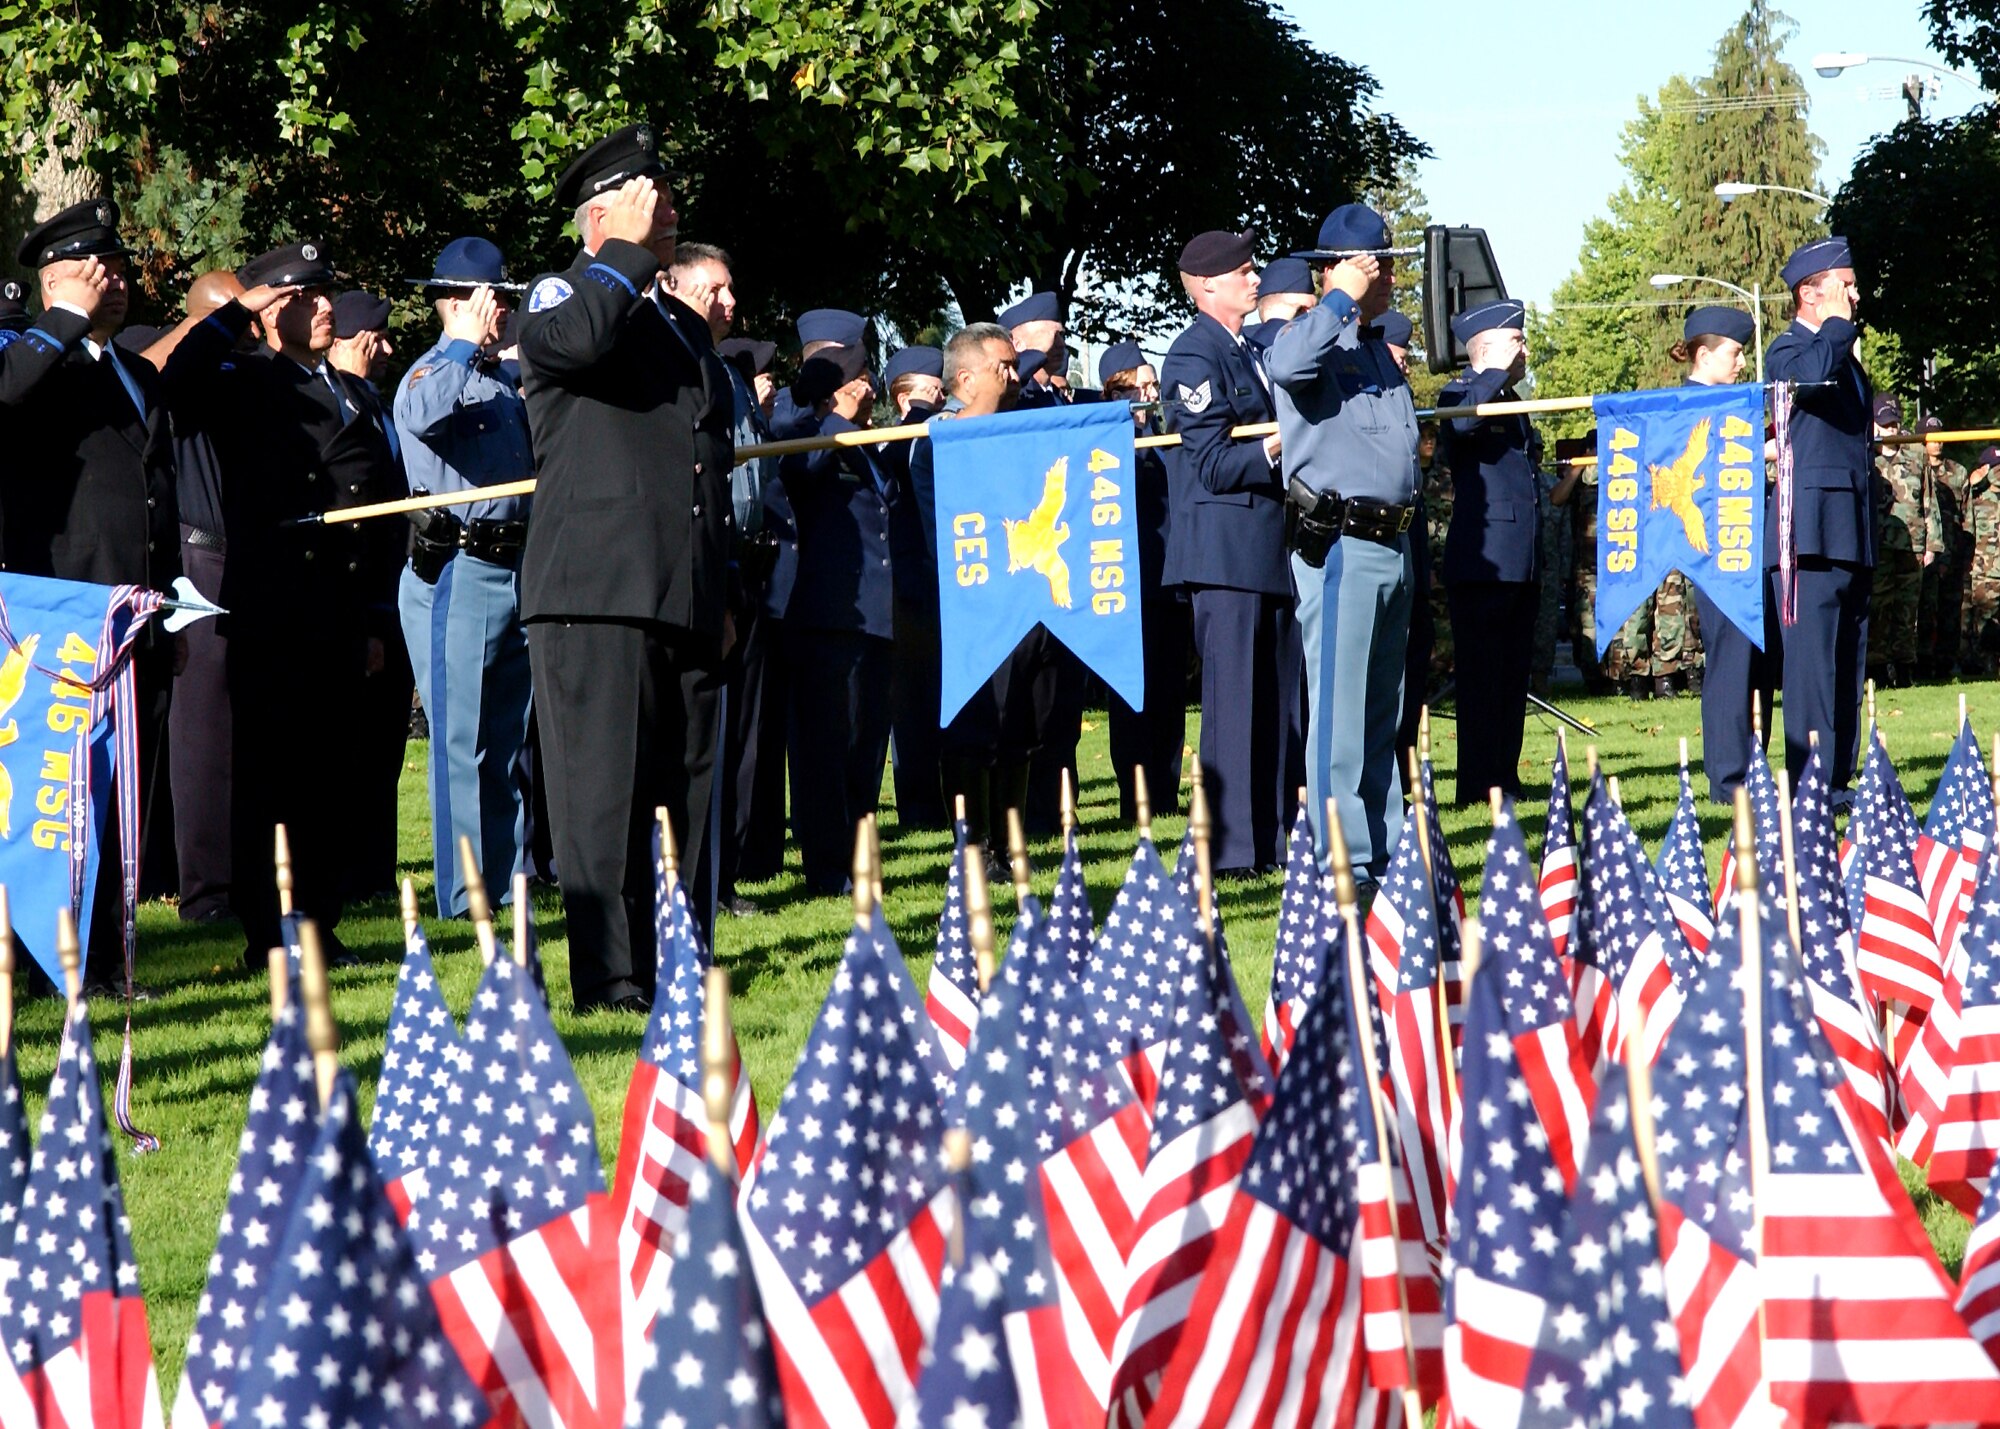 MCCHORD AIR FORCE BASE, Wash., - Reservists for the 446th Airlift Wing salute while in formation during a 9-11 Ceremony here.  The ceremony, hosted by the 446th Airlift Wing and Brig. Gen. Eric Crabtree, served to honor 9-11 first responders, such as firefighters, police, and paramedics. Reservists who work as first responders in their civilian careers wore those uniforms in formation to acknowledge that dual role.  Guests at the ceremony included Governor Chris Gregoire, as well as firefighters, police officers and paramedics from several communities surrounding McChord. (U.S. Air Force photo by Abner Guzman)                             